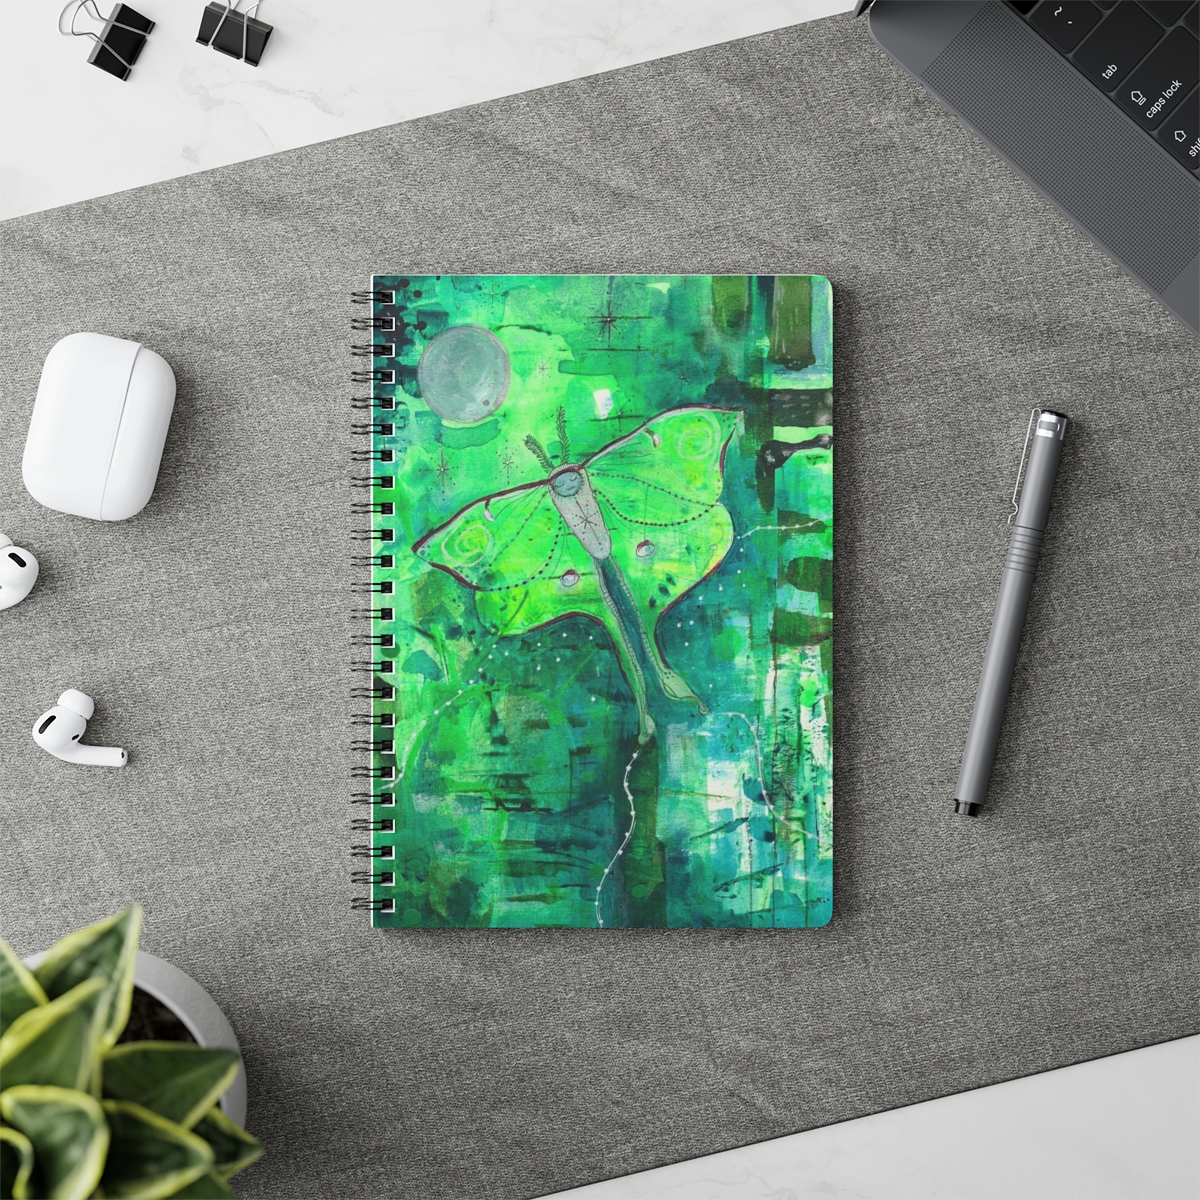 Special luna moth notebook in context. Luna moth is a whimsical painting. The moth flies against a background of striking greens towards the moon.